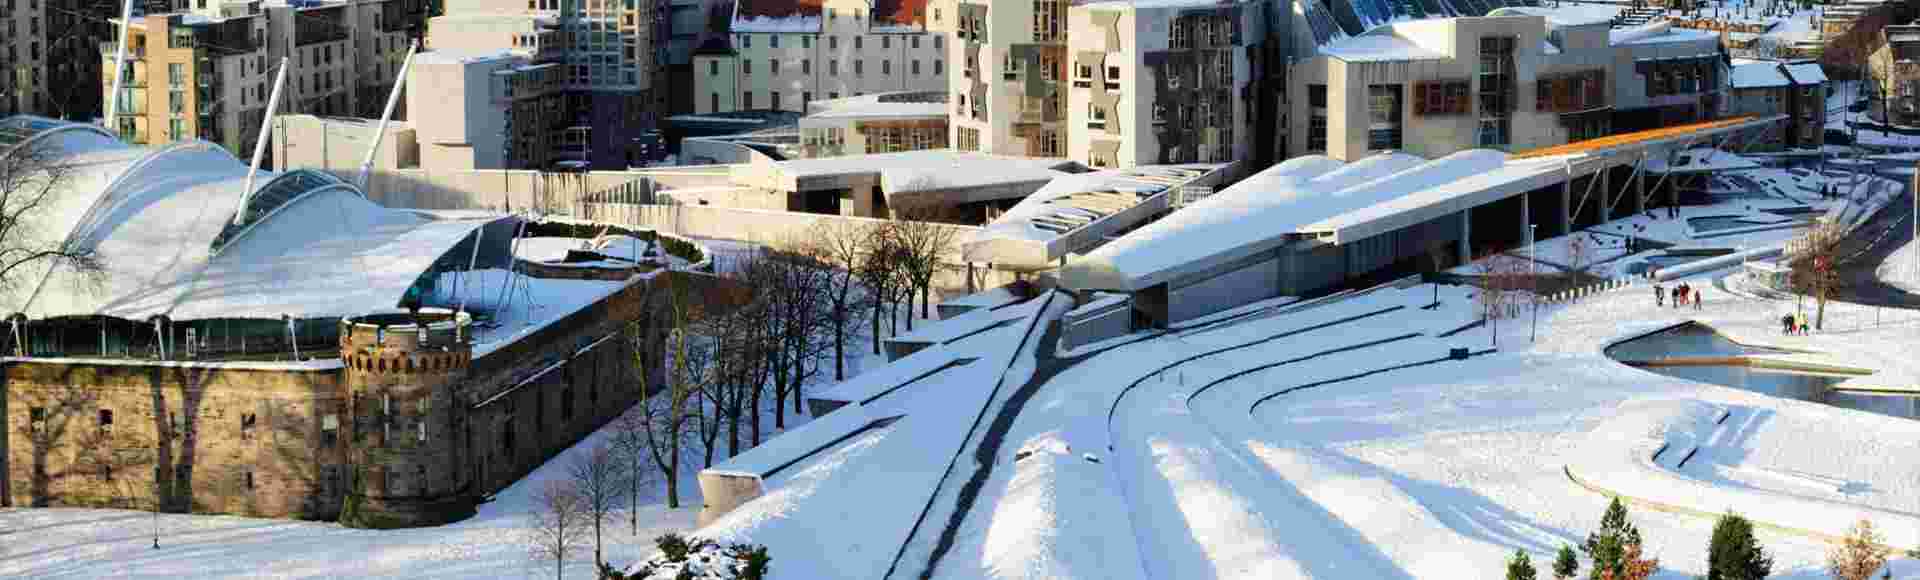 The Scottish Parliament building in the snow from Salisbury Crags, Edinburgh.